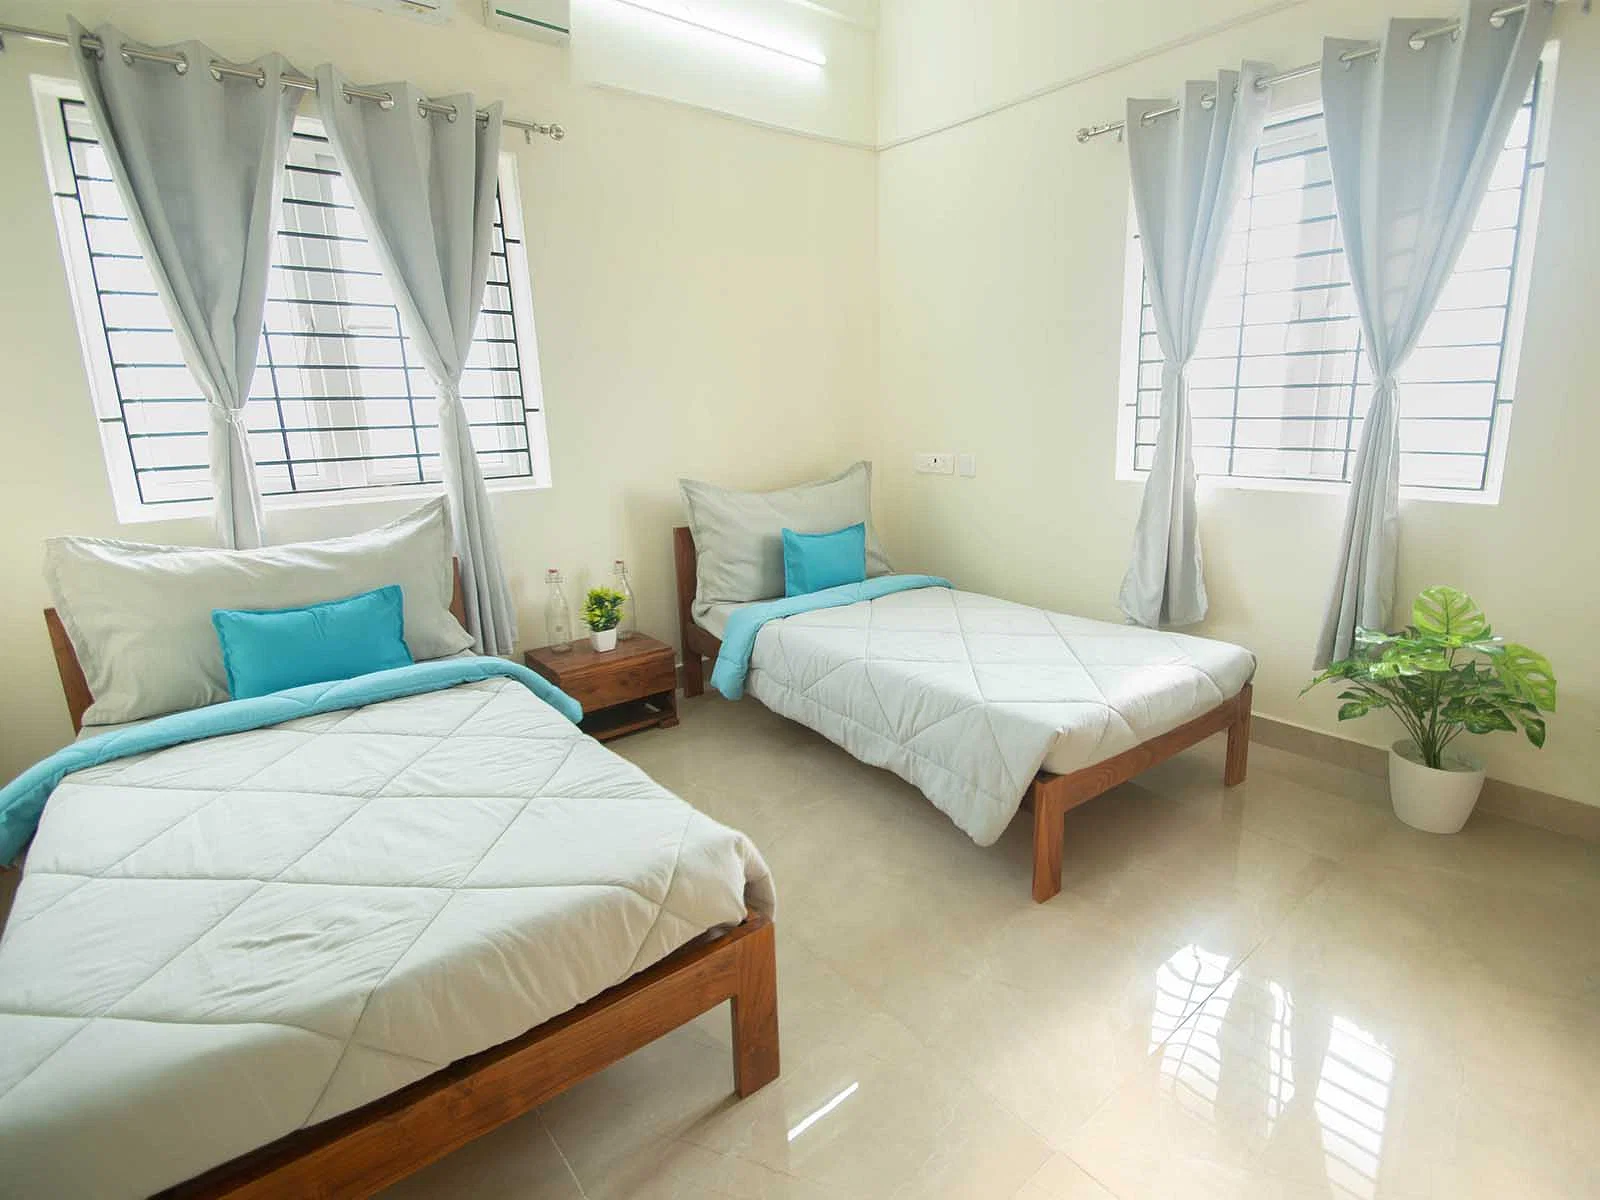 budget-friendly PGs and hostels for men and women with single rooms with daily hopusekeeping-Zolo Ironwood